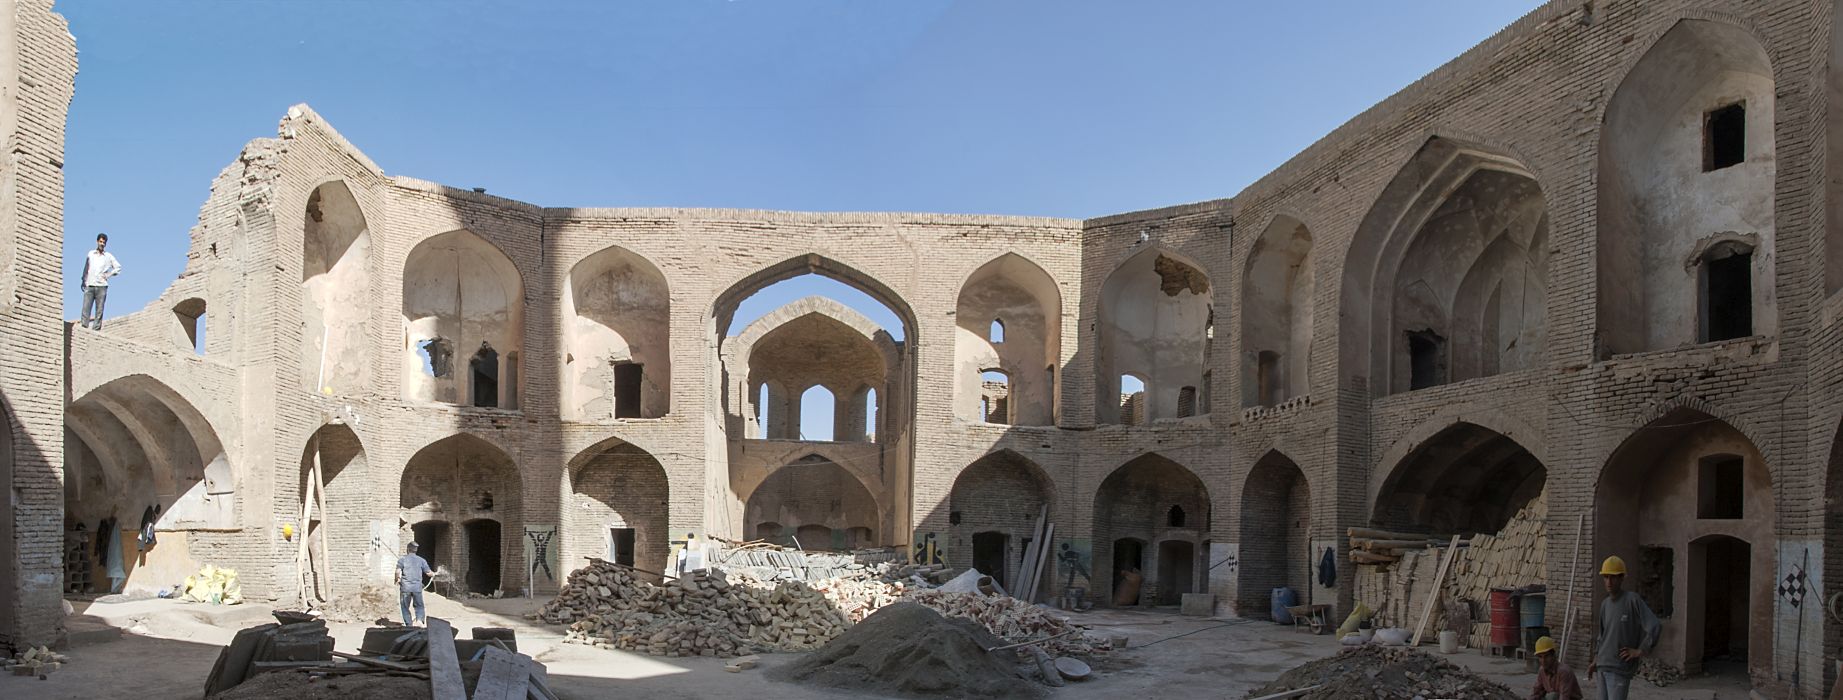 Composite view of courtyard looking southwest (toward qibla side).